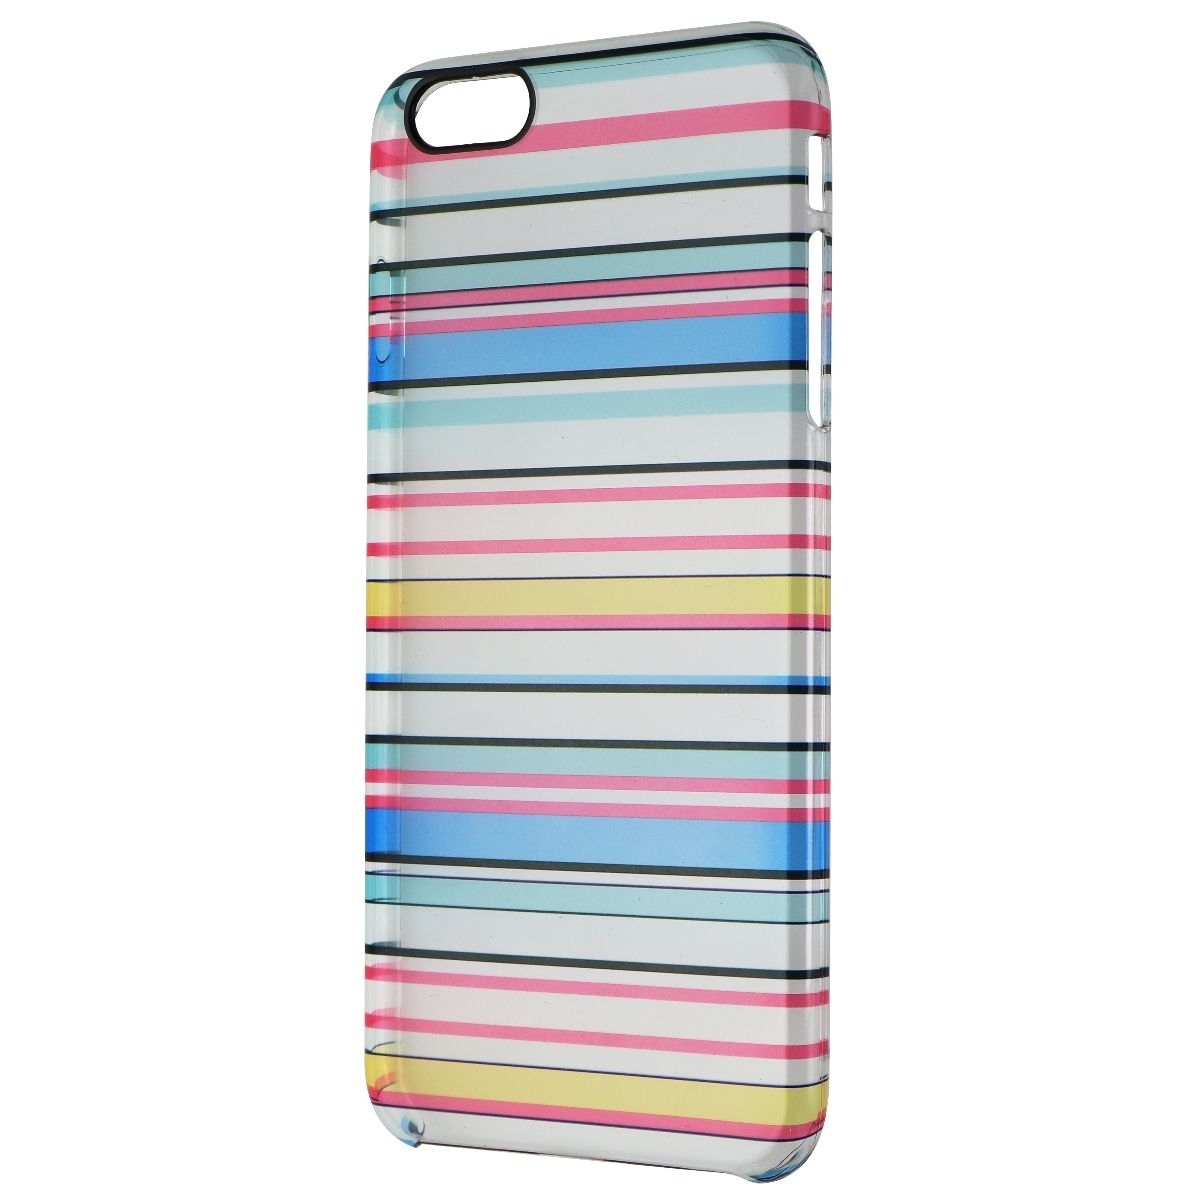 Uncommon Hardshell Case For Apple IPhone 6s Plus/6 Plus - Multi Stripe/Clear (Refurbished)